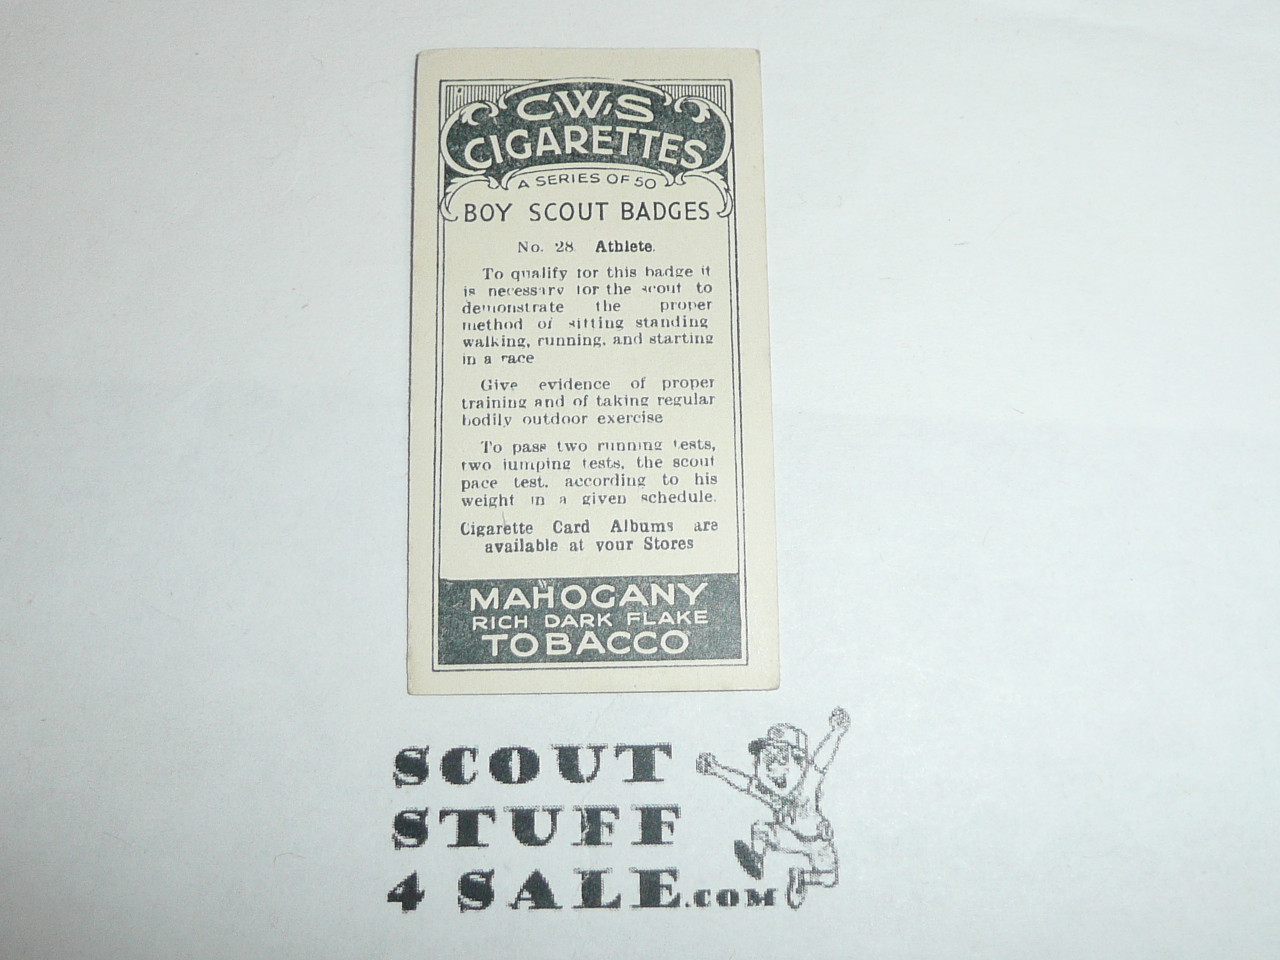 CWS Cigarette Company Premium Card, Boy Scout Badges Series of 50, Card #28 Athlete, 1939